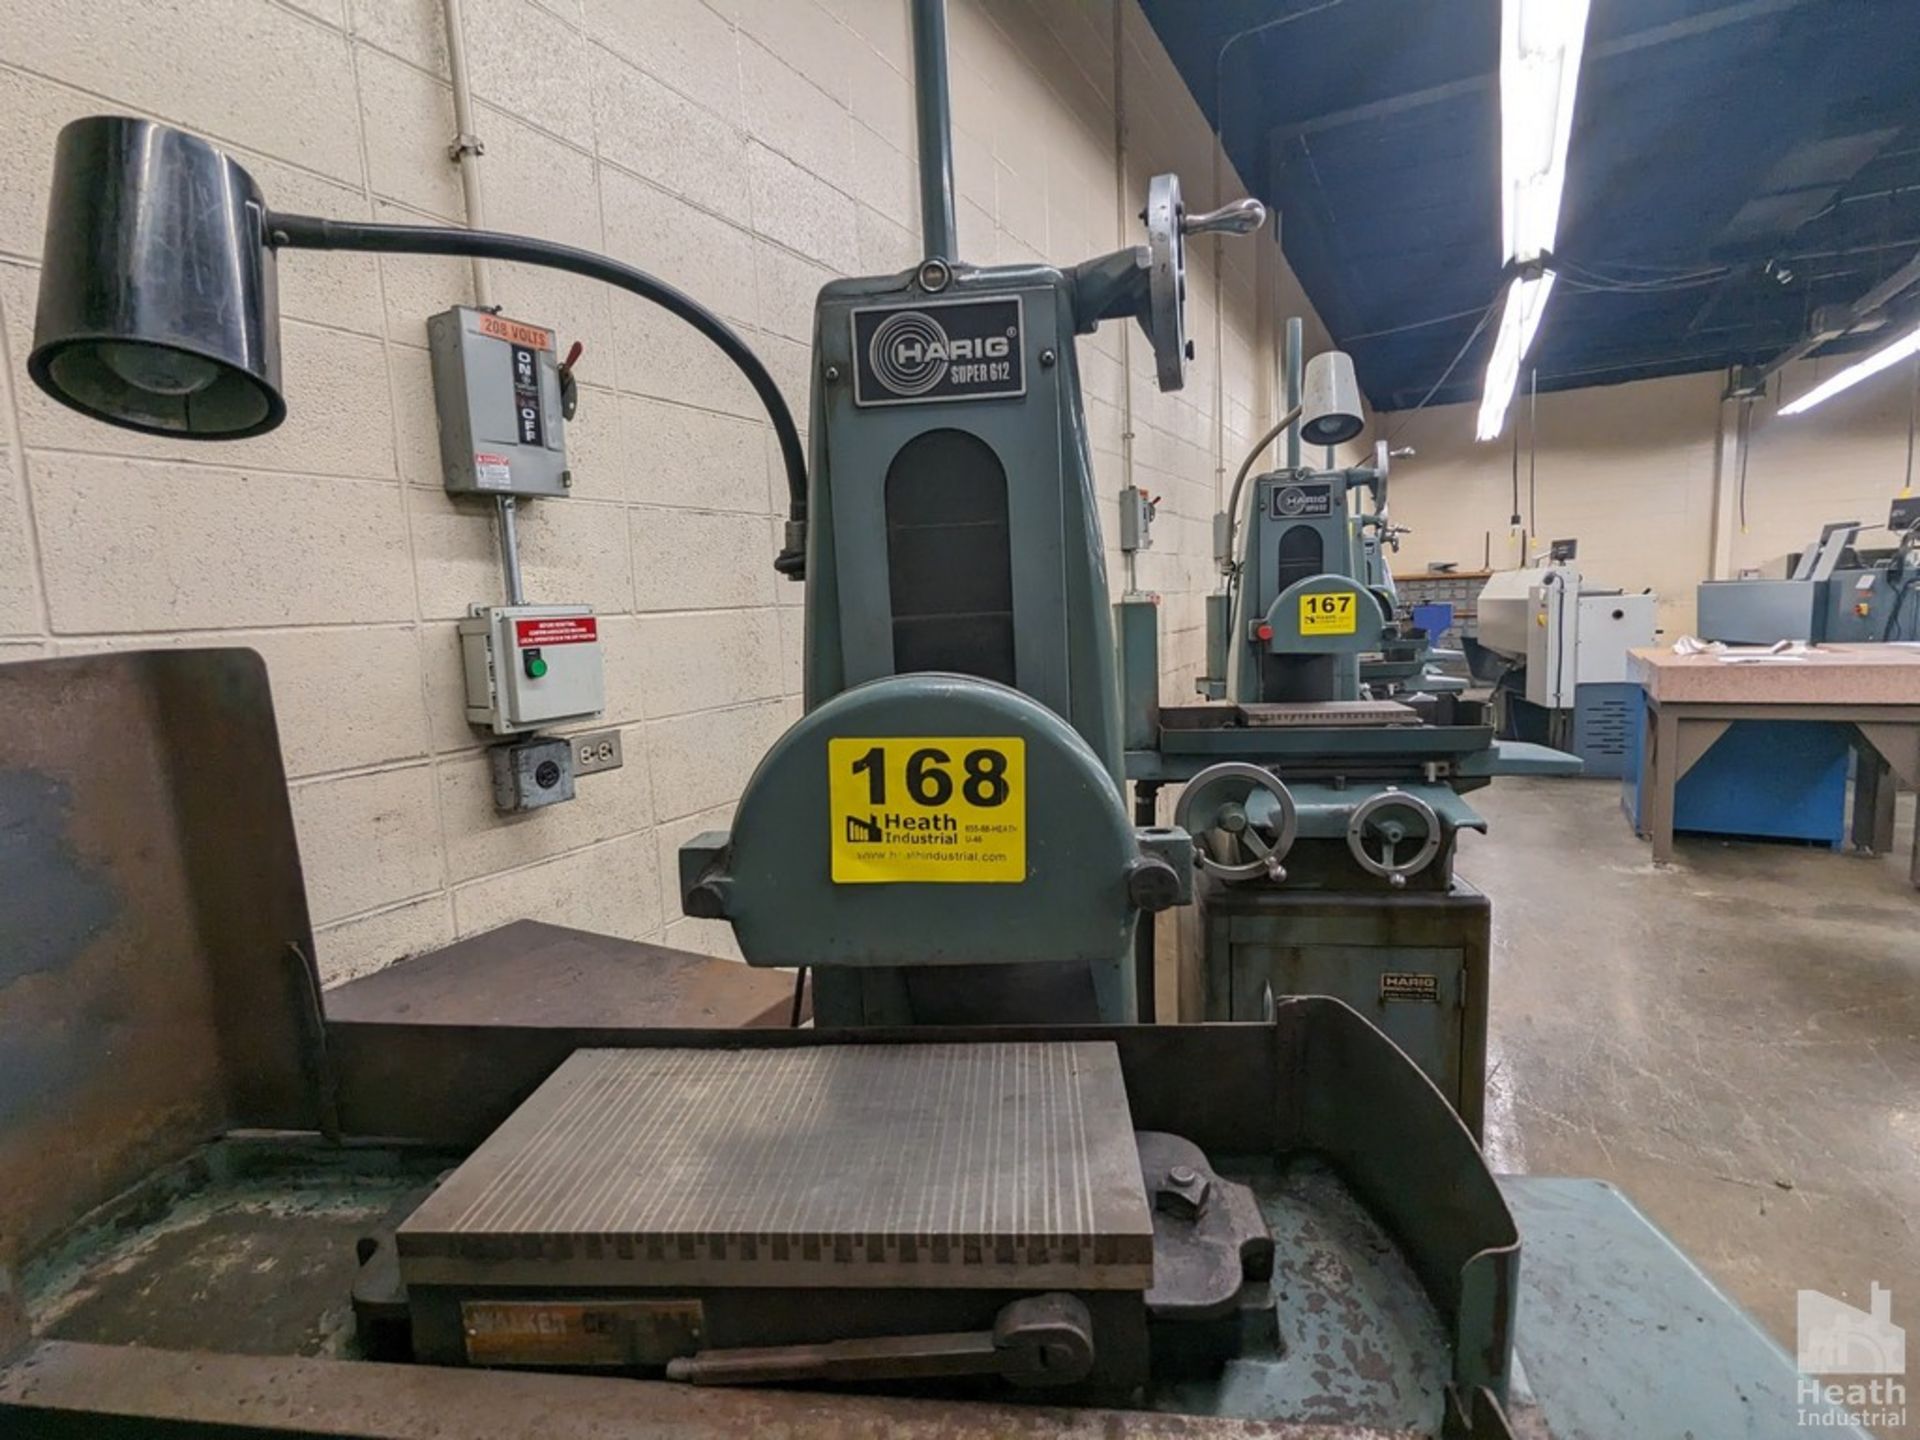 HARIG 6"X12" MODEL SUPER 612 SURFACE GRINDER, S/N 10642, WITH PERMANENT MAGNETIC CHUCK Loading - Image 3 of 5